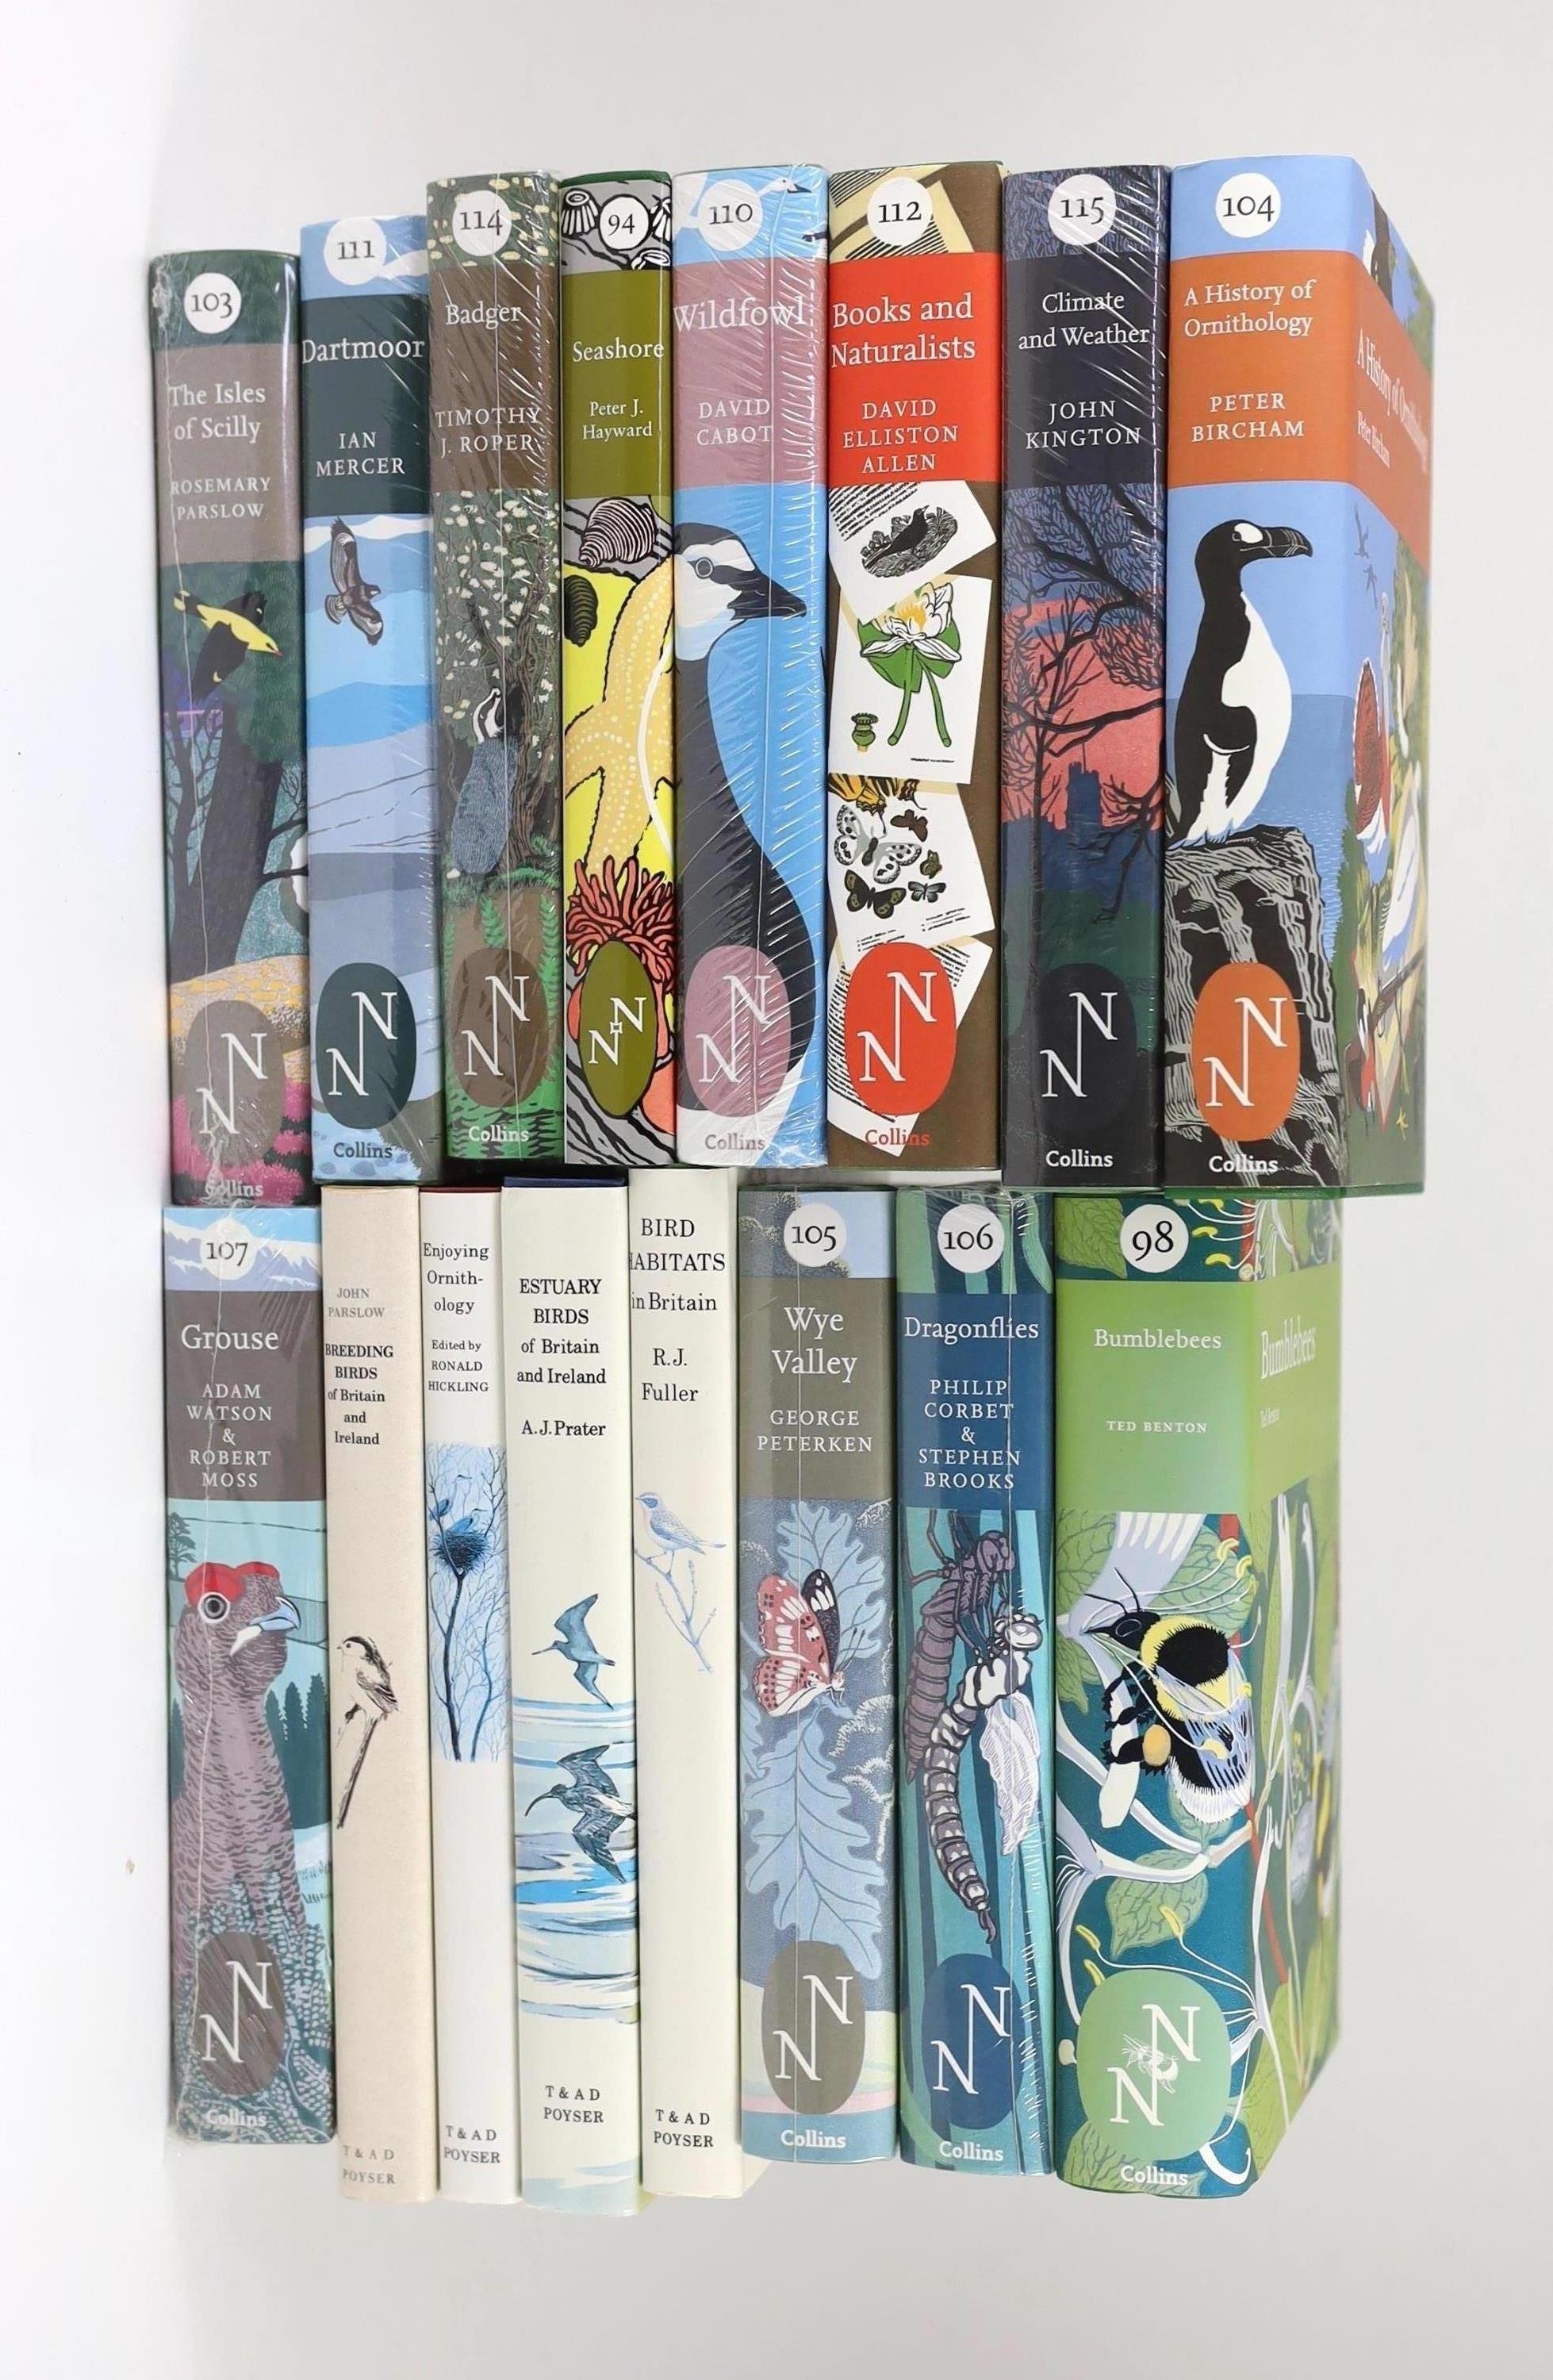 The New Naturalist Library - 12 mint tiles, all 1st editions:- Nos. - 94 Seahorse, 98 Bumblebees, 103 The Isles of Scilly, 104 A History of Ornithology, 105 Wye Valley, 106 Dragonflies, 107 Grouse, 110 Wildfowl, 111 Dart